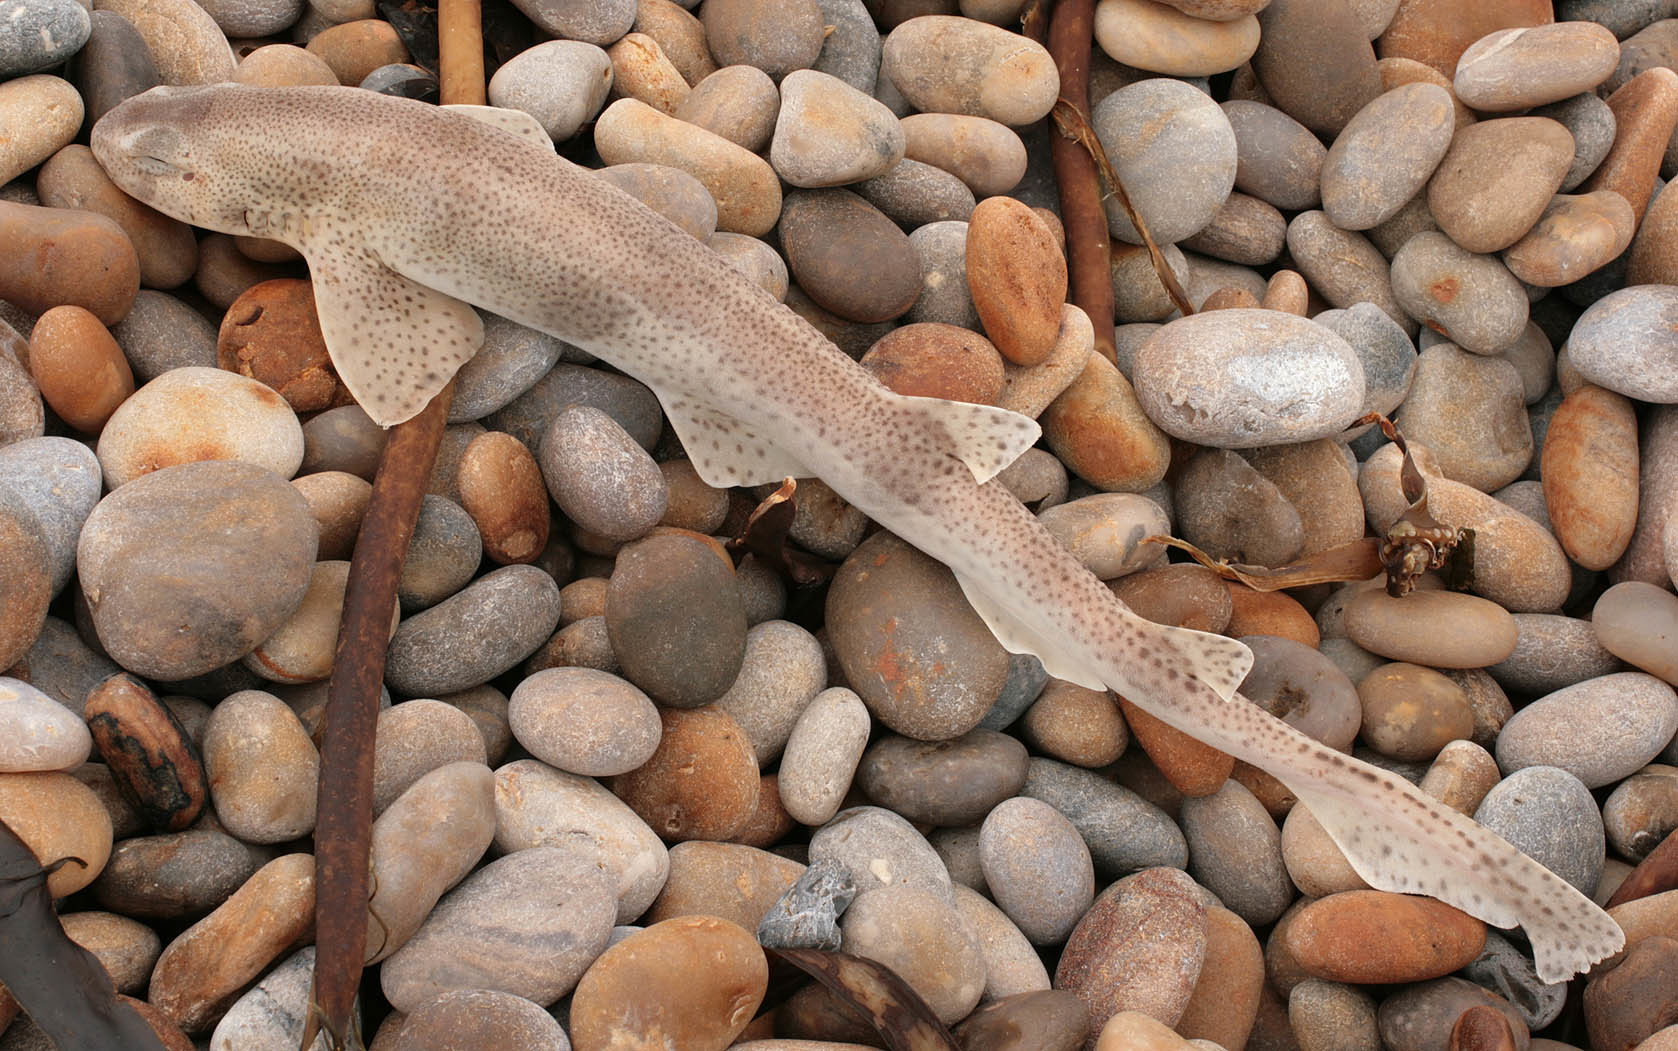 Image of Lesser Spotted Dogfish